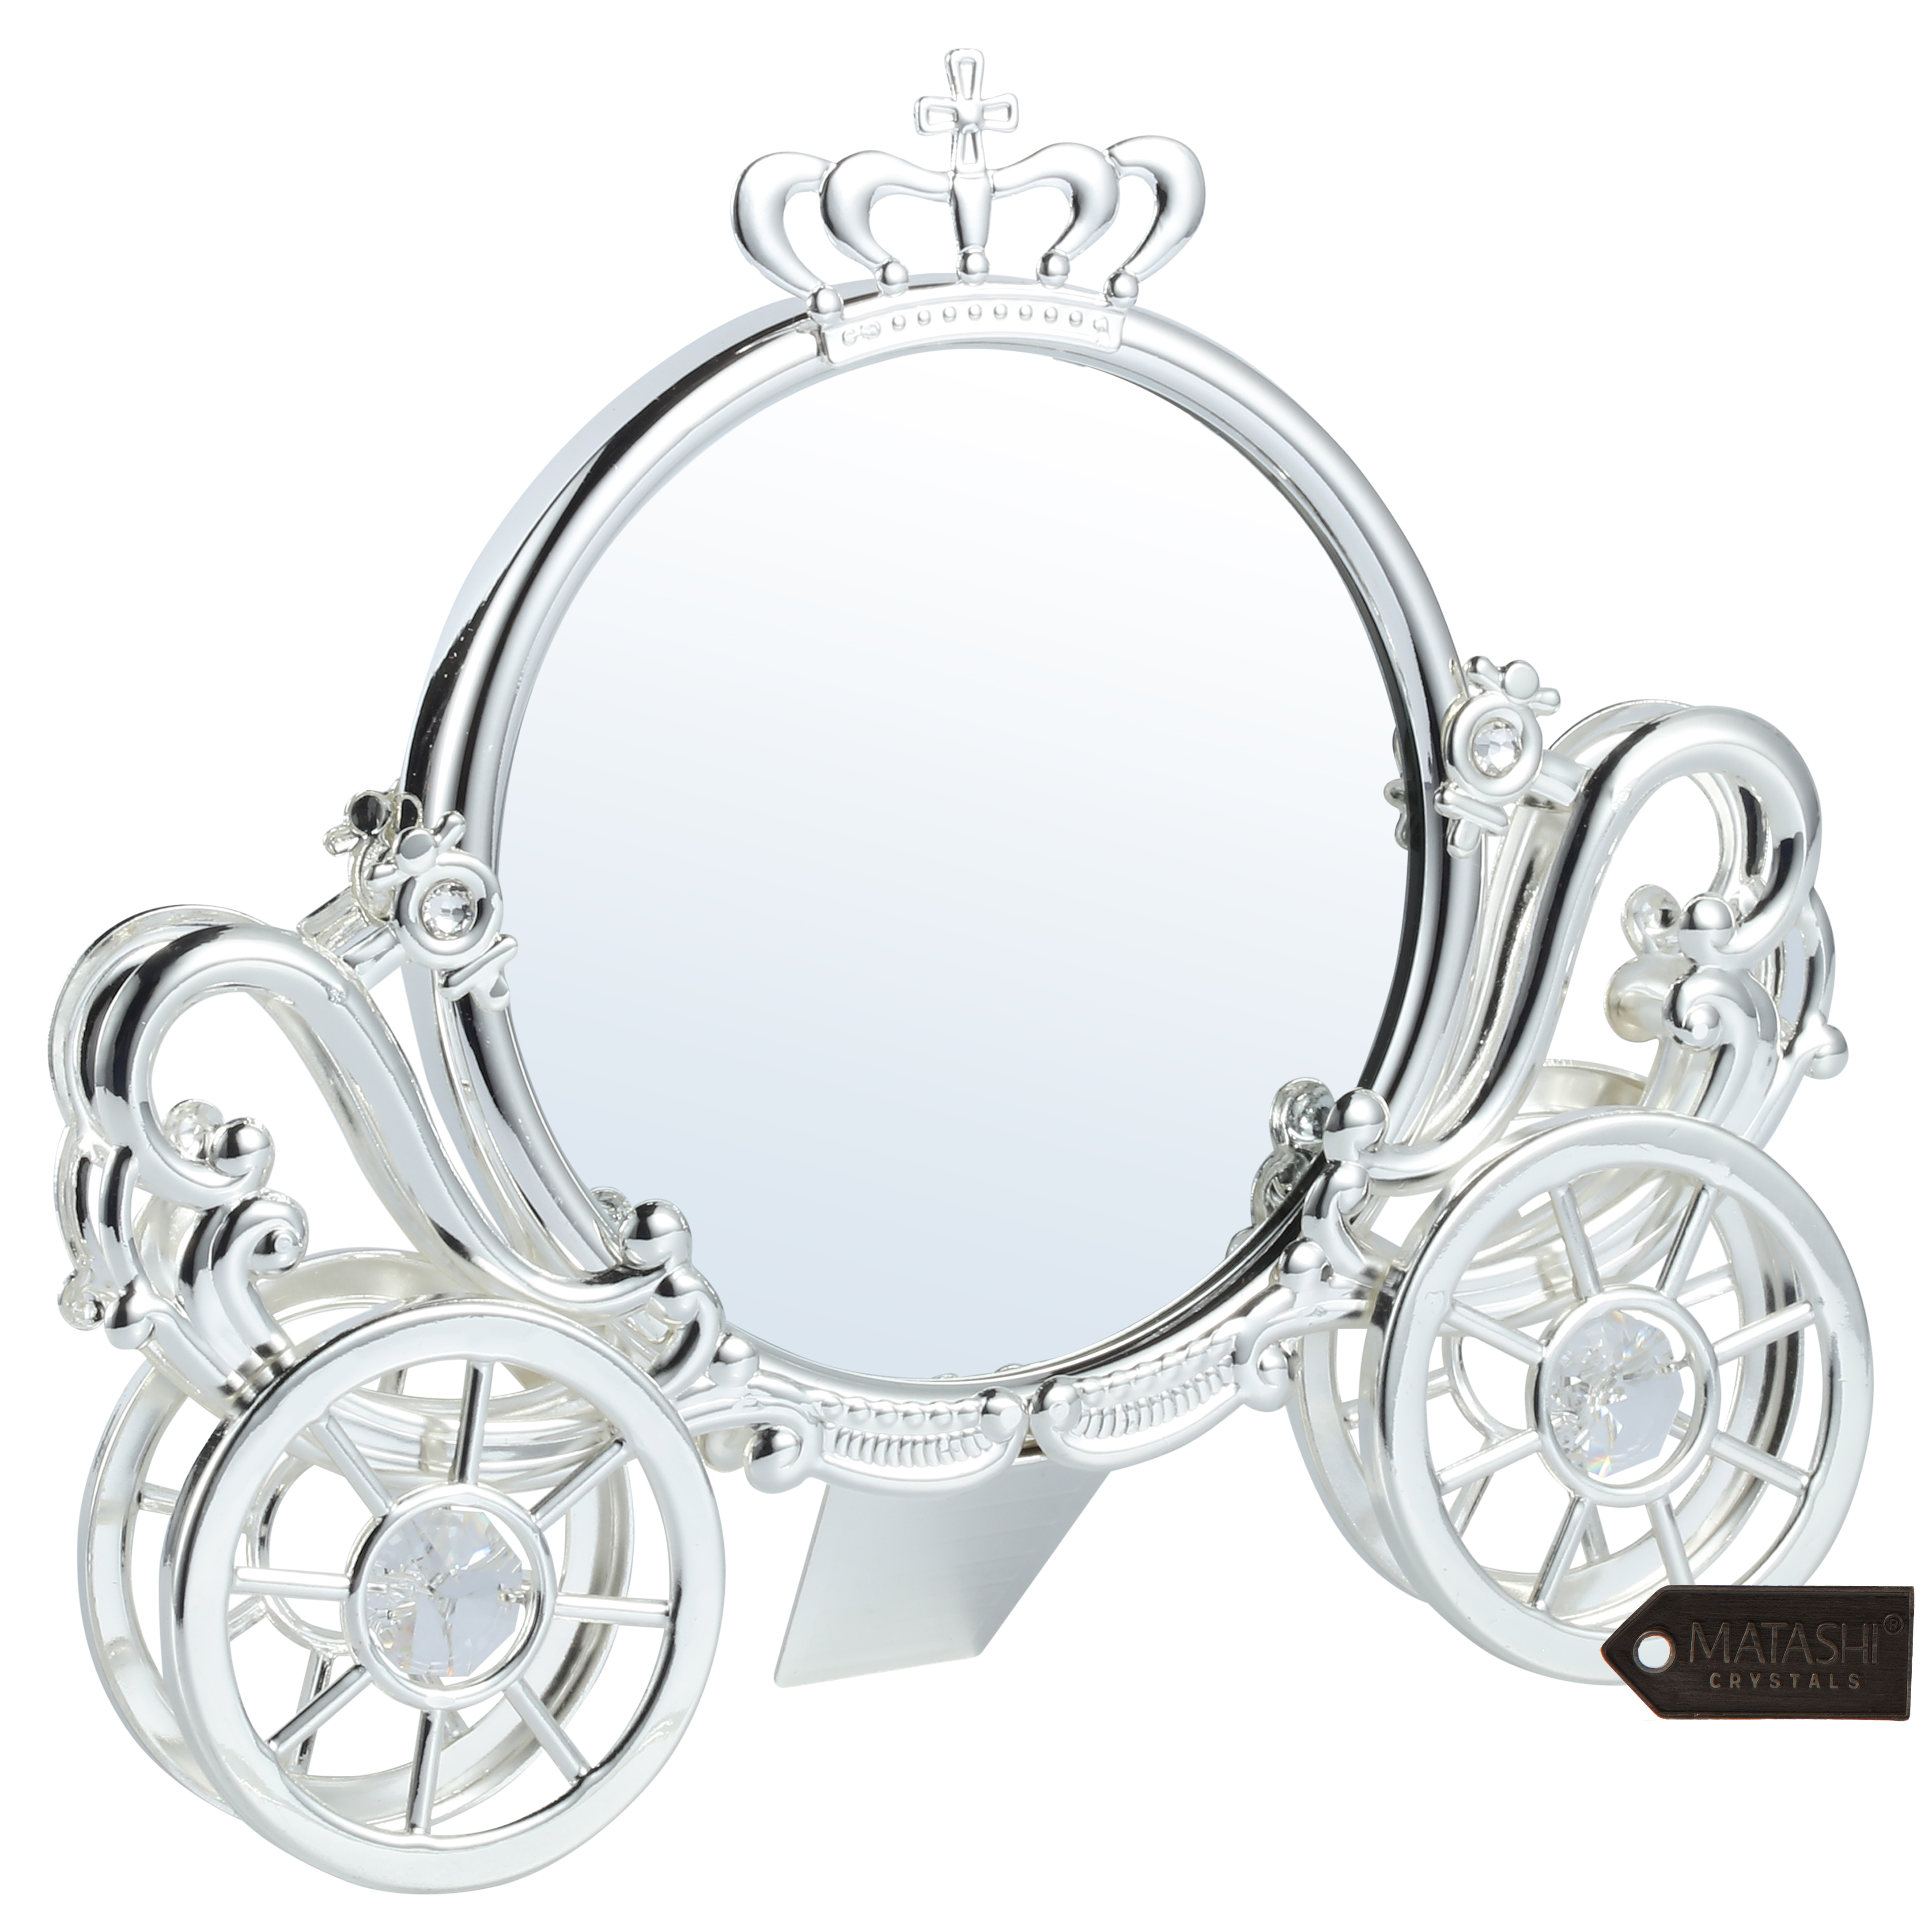 Silver Plated Double Sided Cinderella Princess Coach Mirror Embellished With Crystals By Matashi